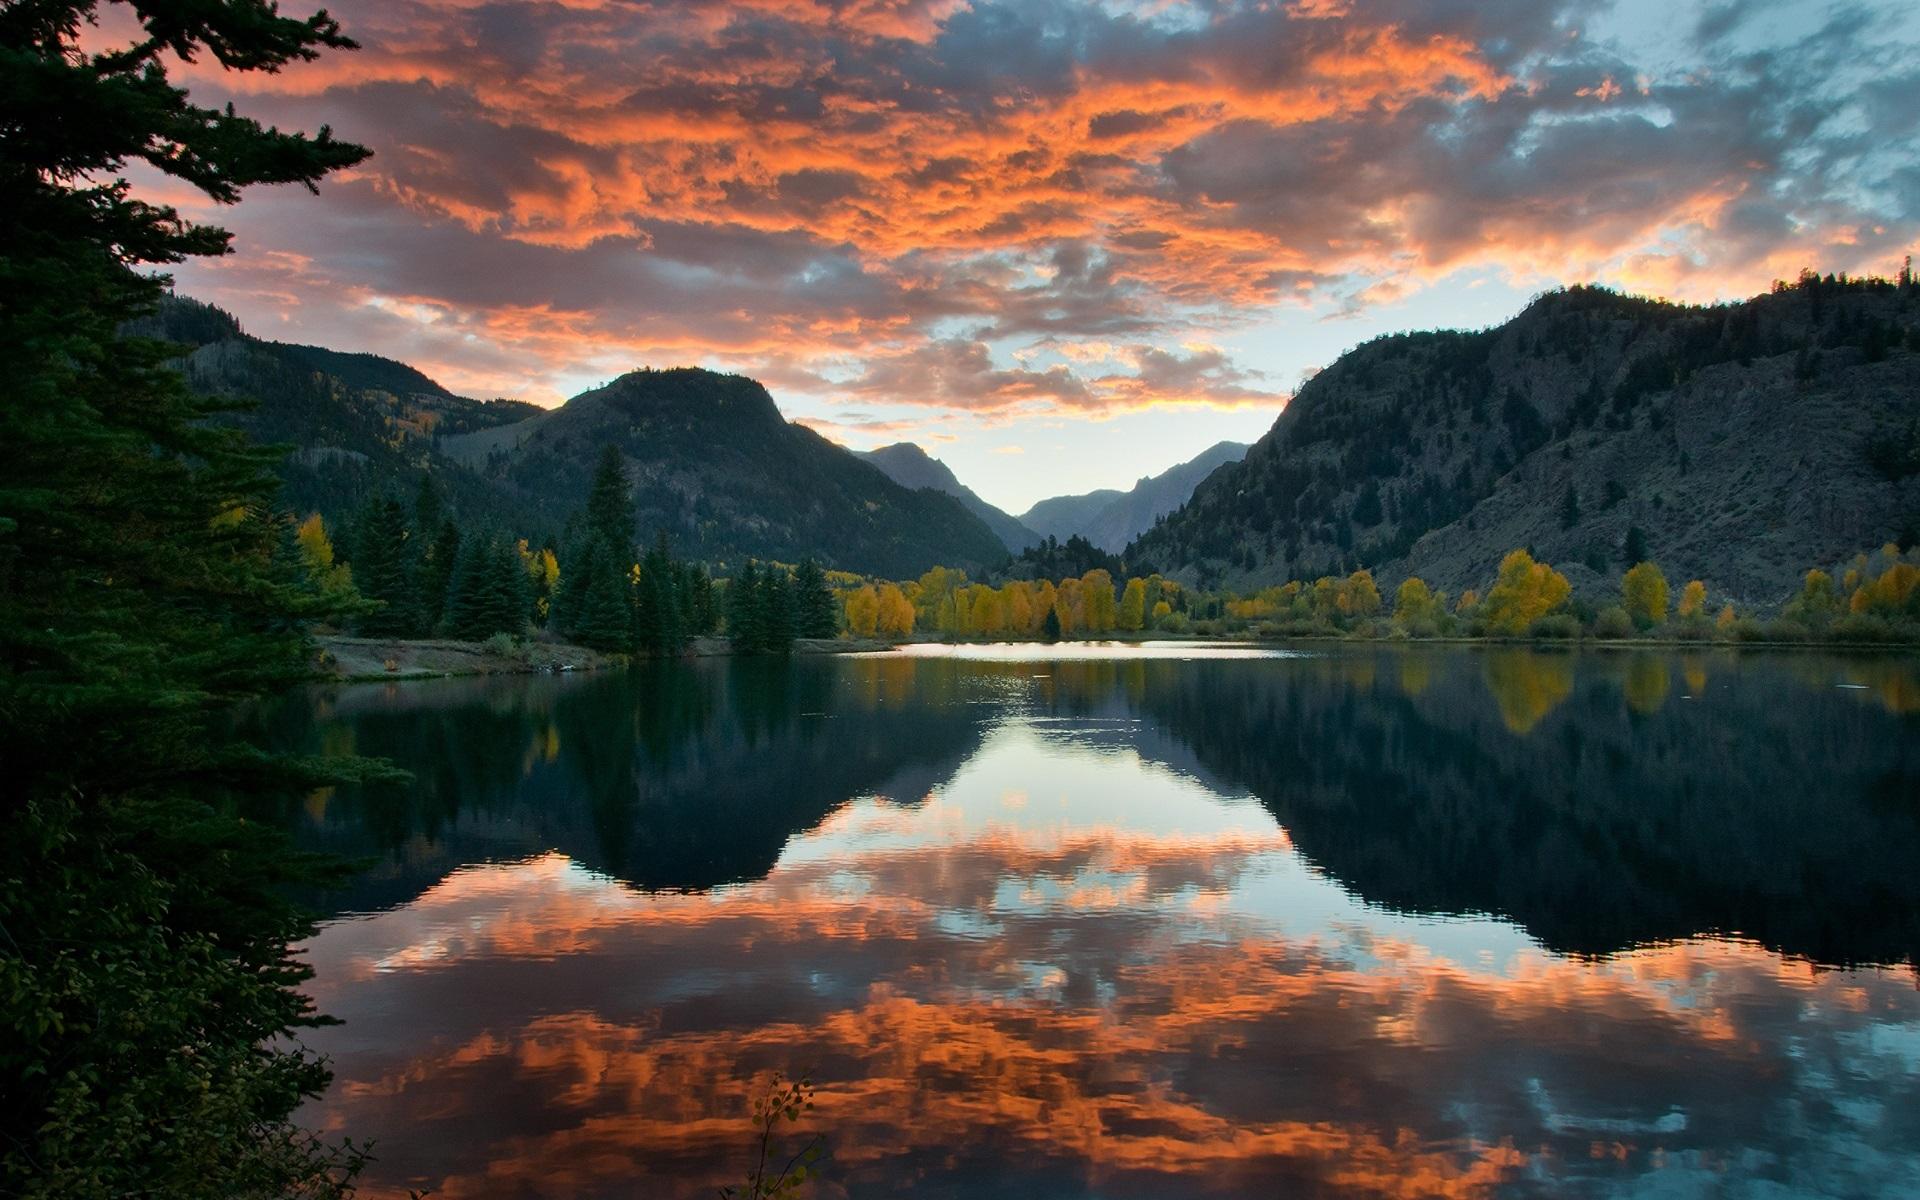 Lake, sky, clouds, mountains, trees, water reflection